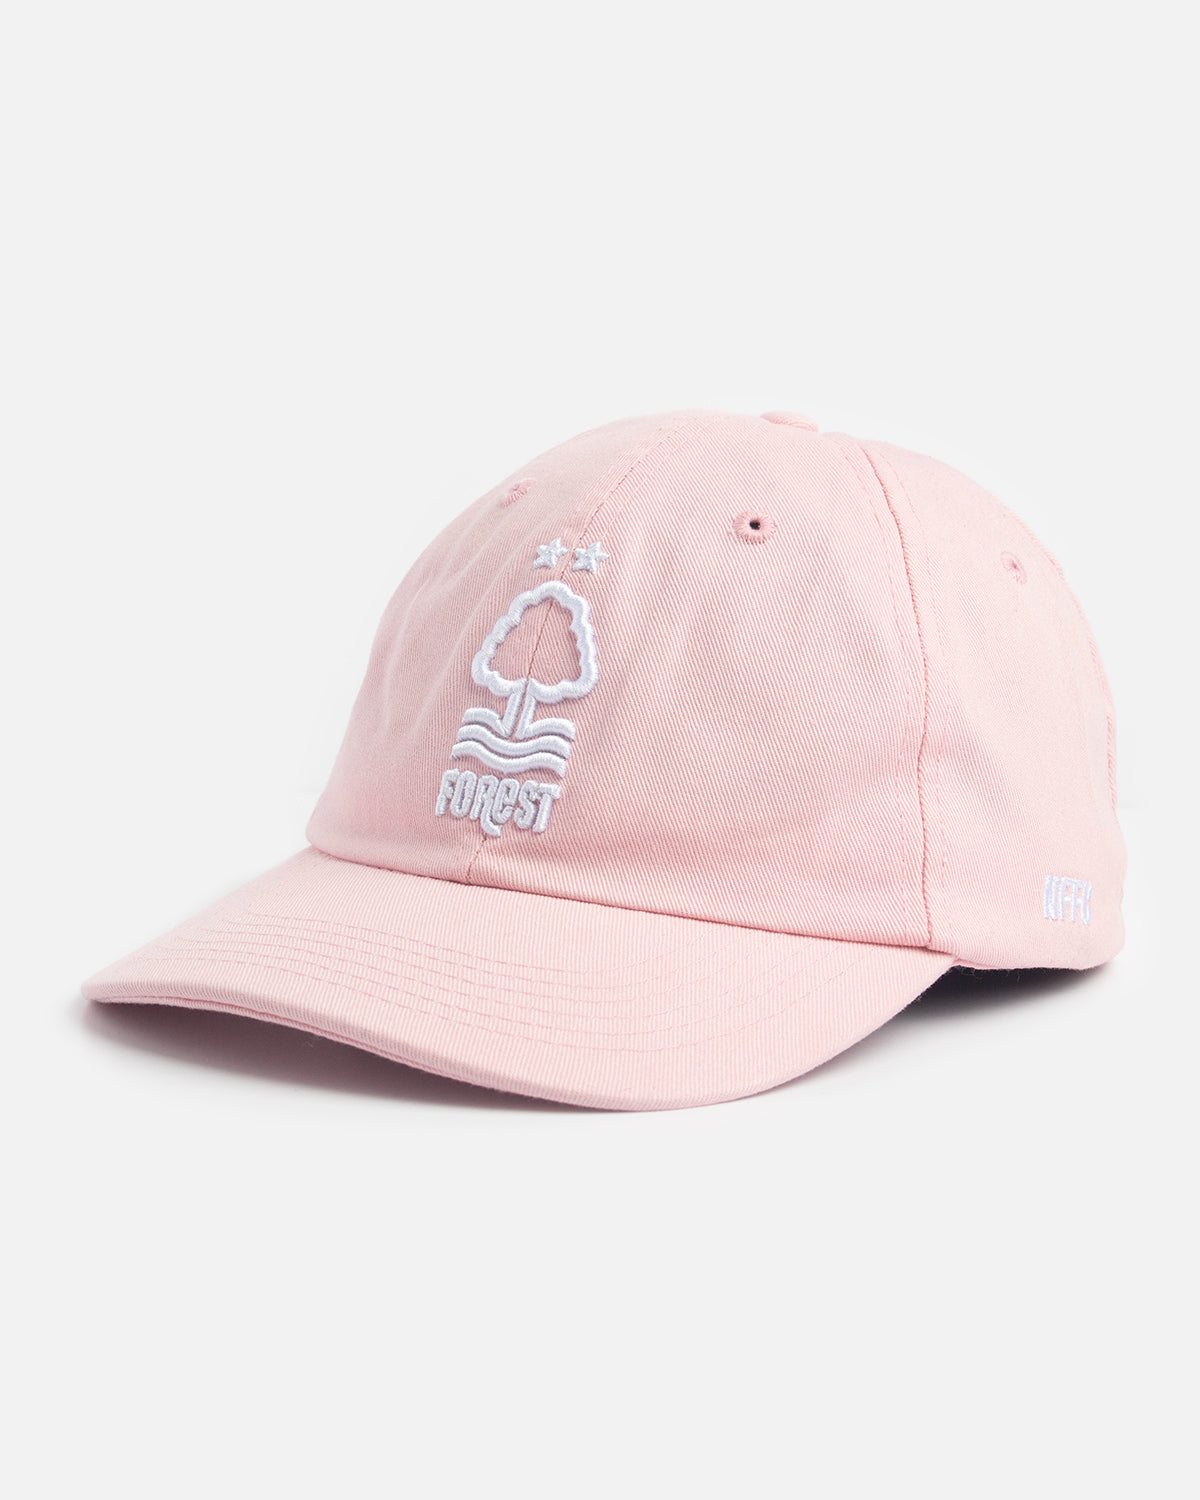 NFFC Womens Soft Pink Relaxed Fit Cap